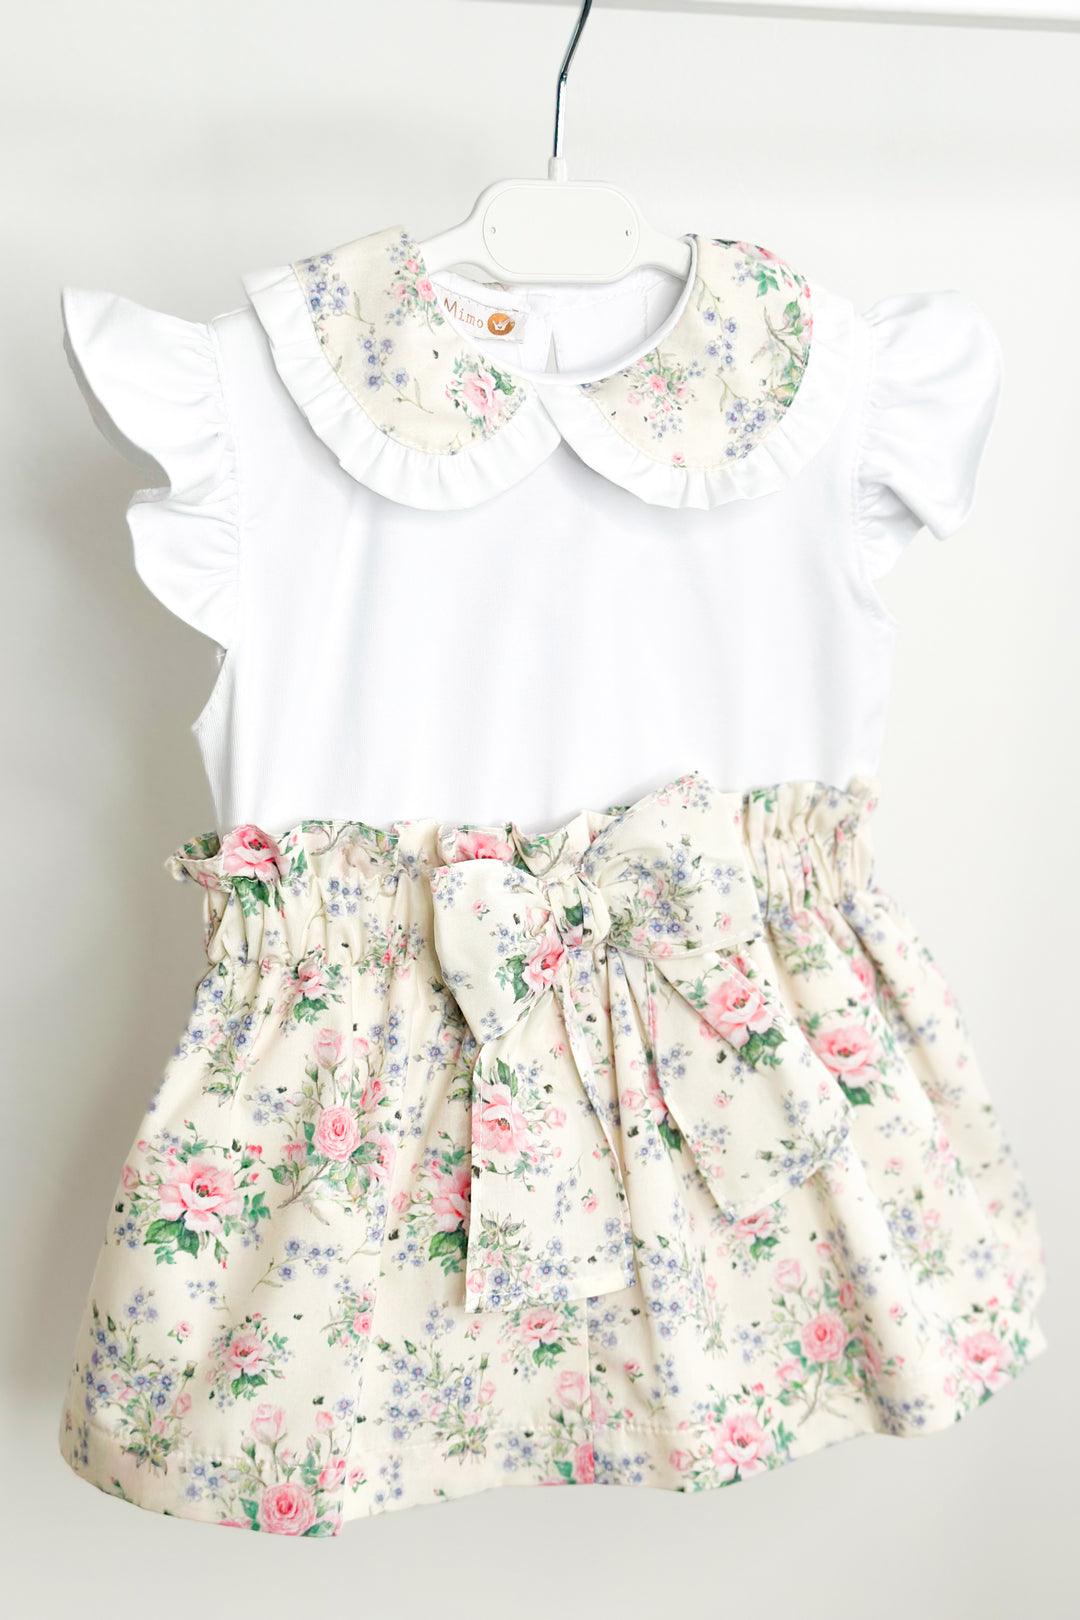 Puro Mimo "Adelyn" Pale Lemon & Pink Vintage Floral Top & Skirt | Millie and John